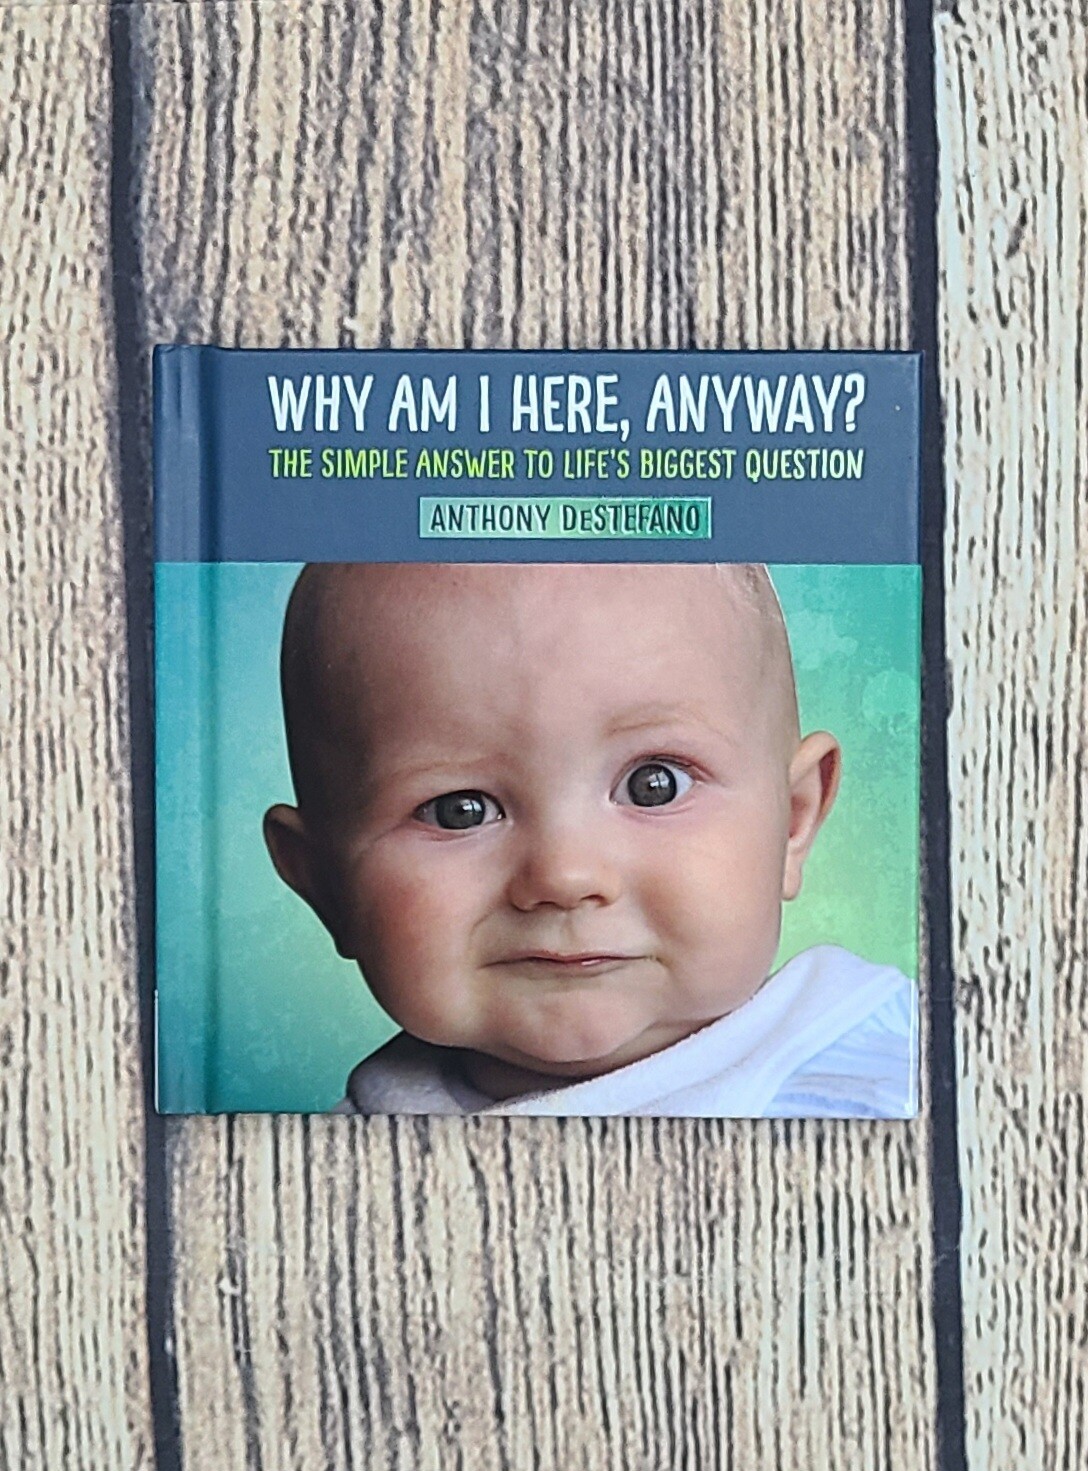 Why Am I Here, Anyway?: The Simple Answer to Life's biggest Question by Anthony DeStefano